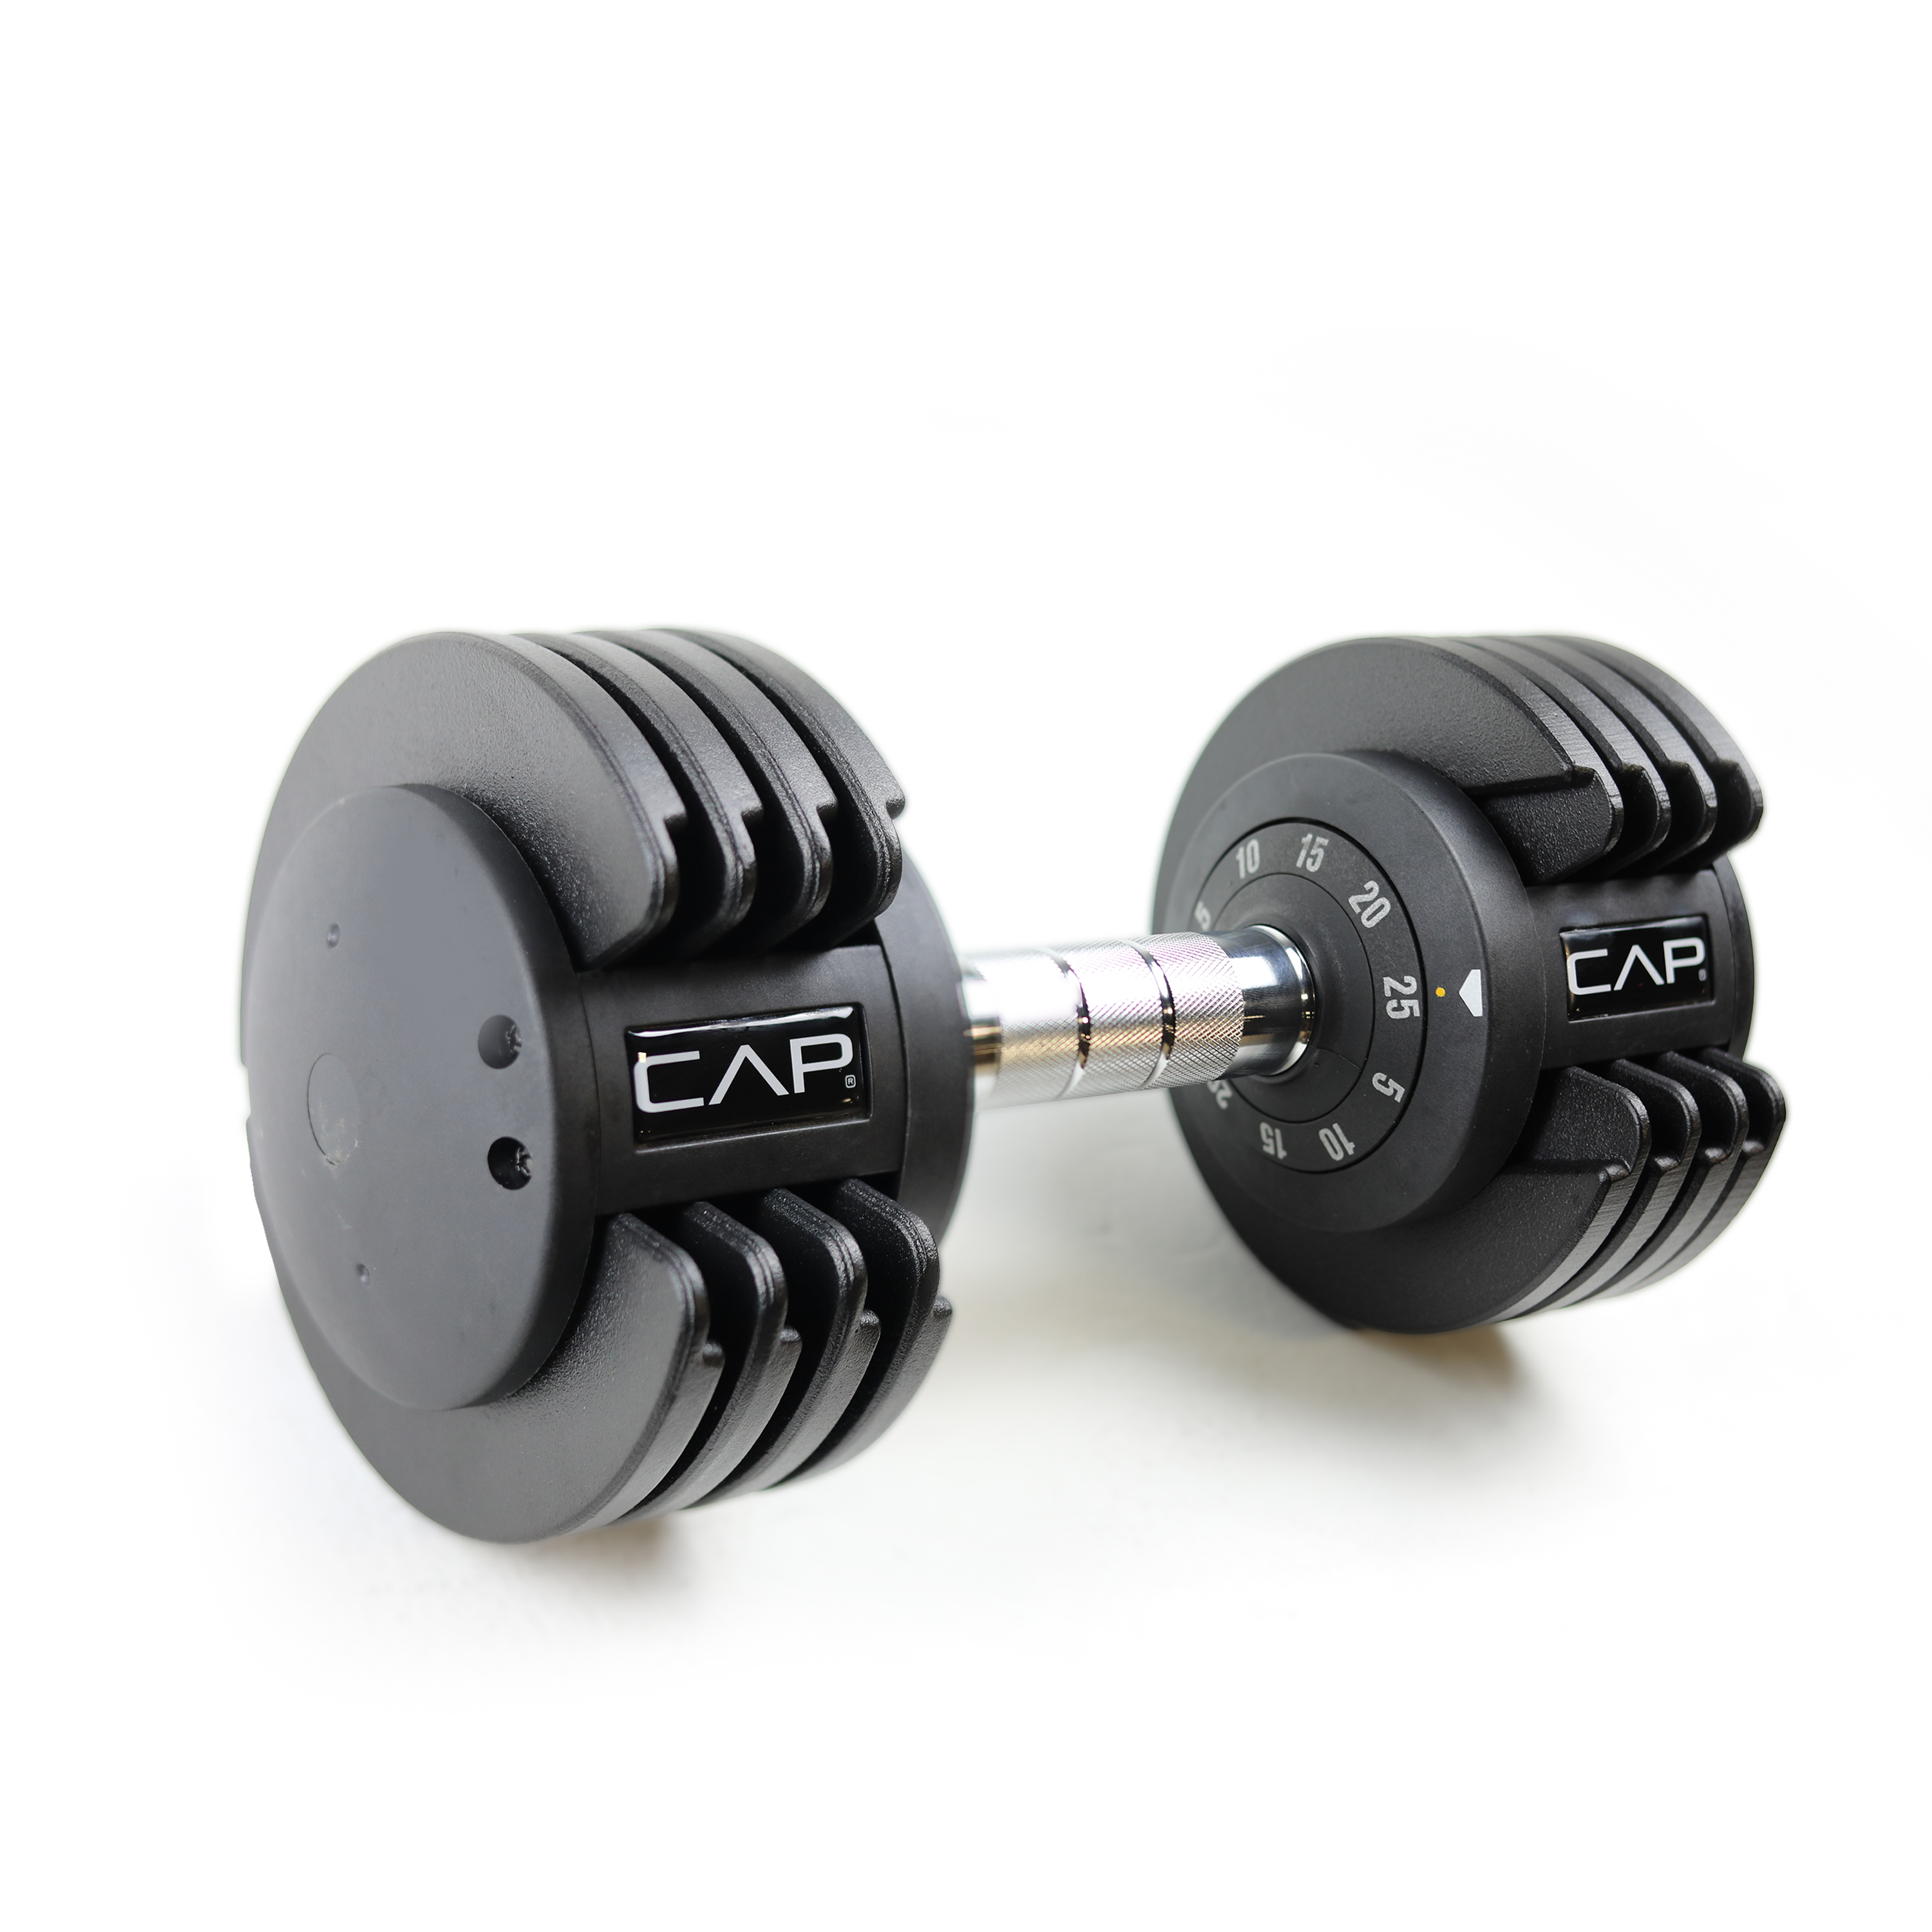 CAP Barbell 25 lb Adjustable Dumbbell Set, Quick Select Adjustability from 5-25 lb, Pair, Black - image 4 of 7